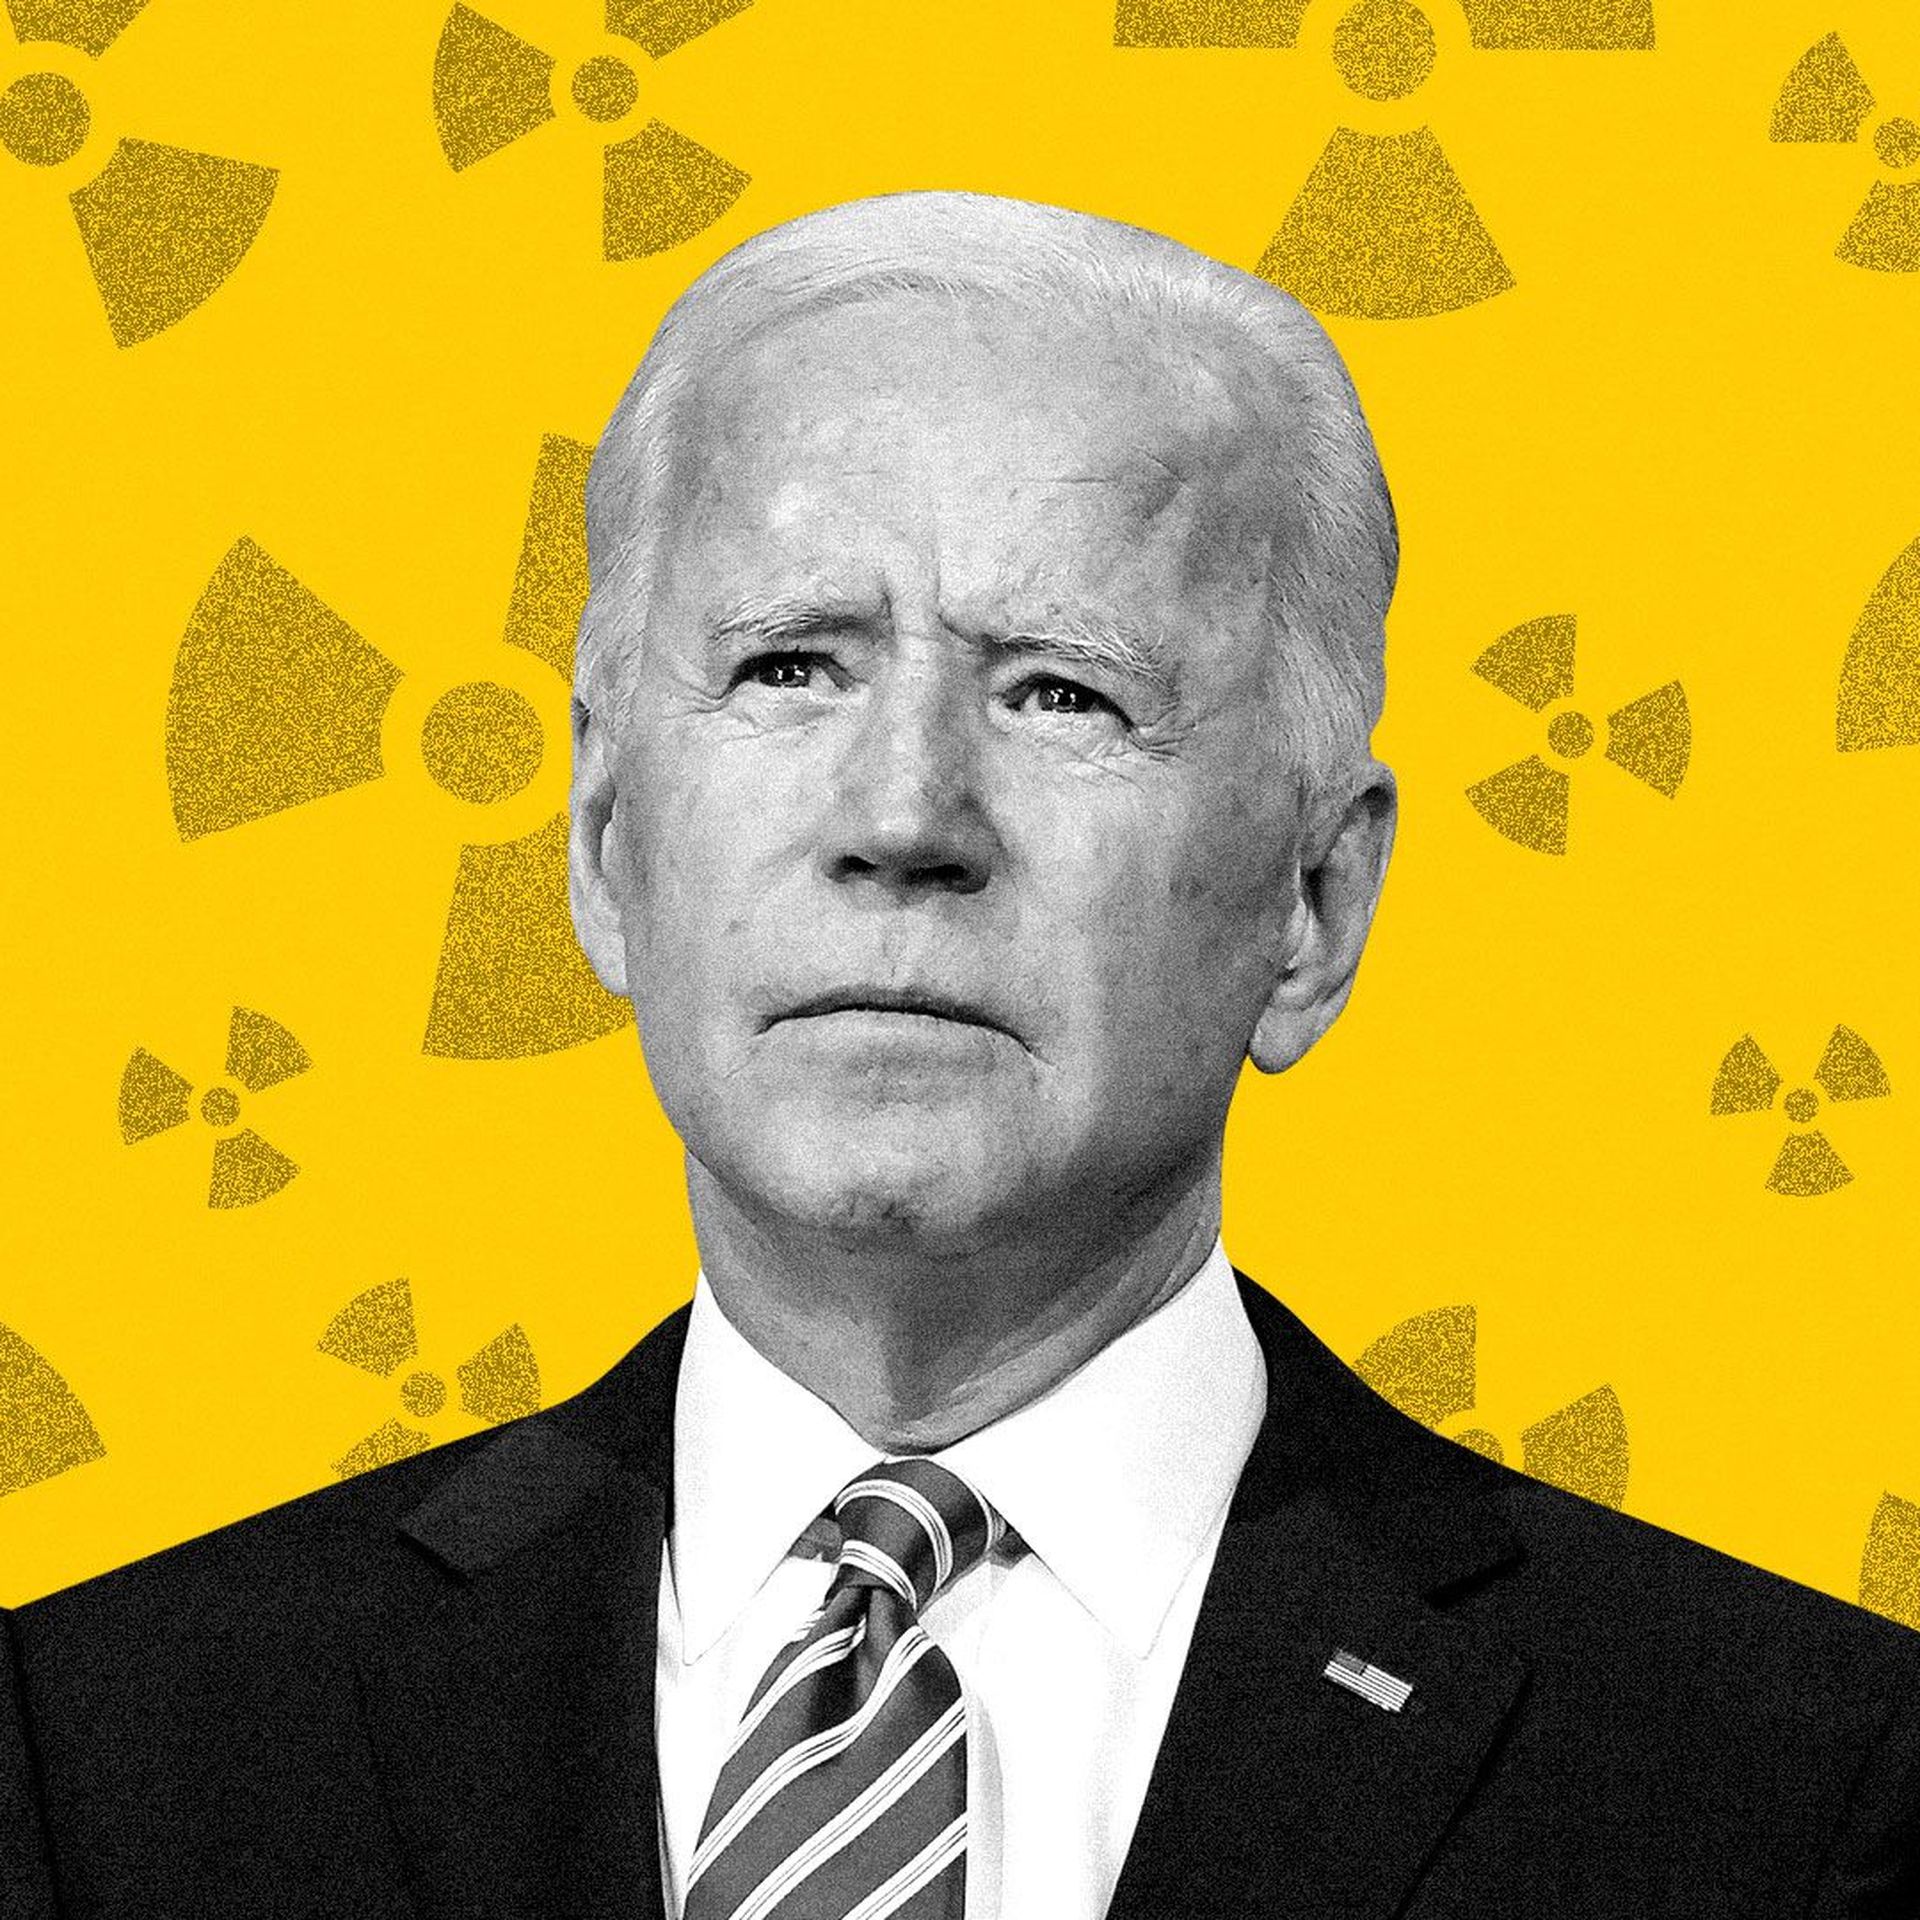 Illustration of serious looking Joseph Biden on a nuclear icon pattern